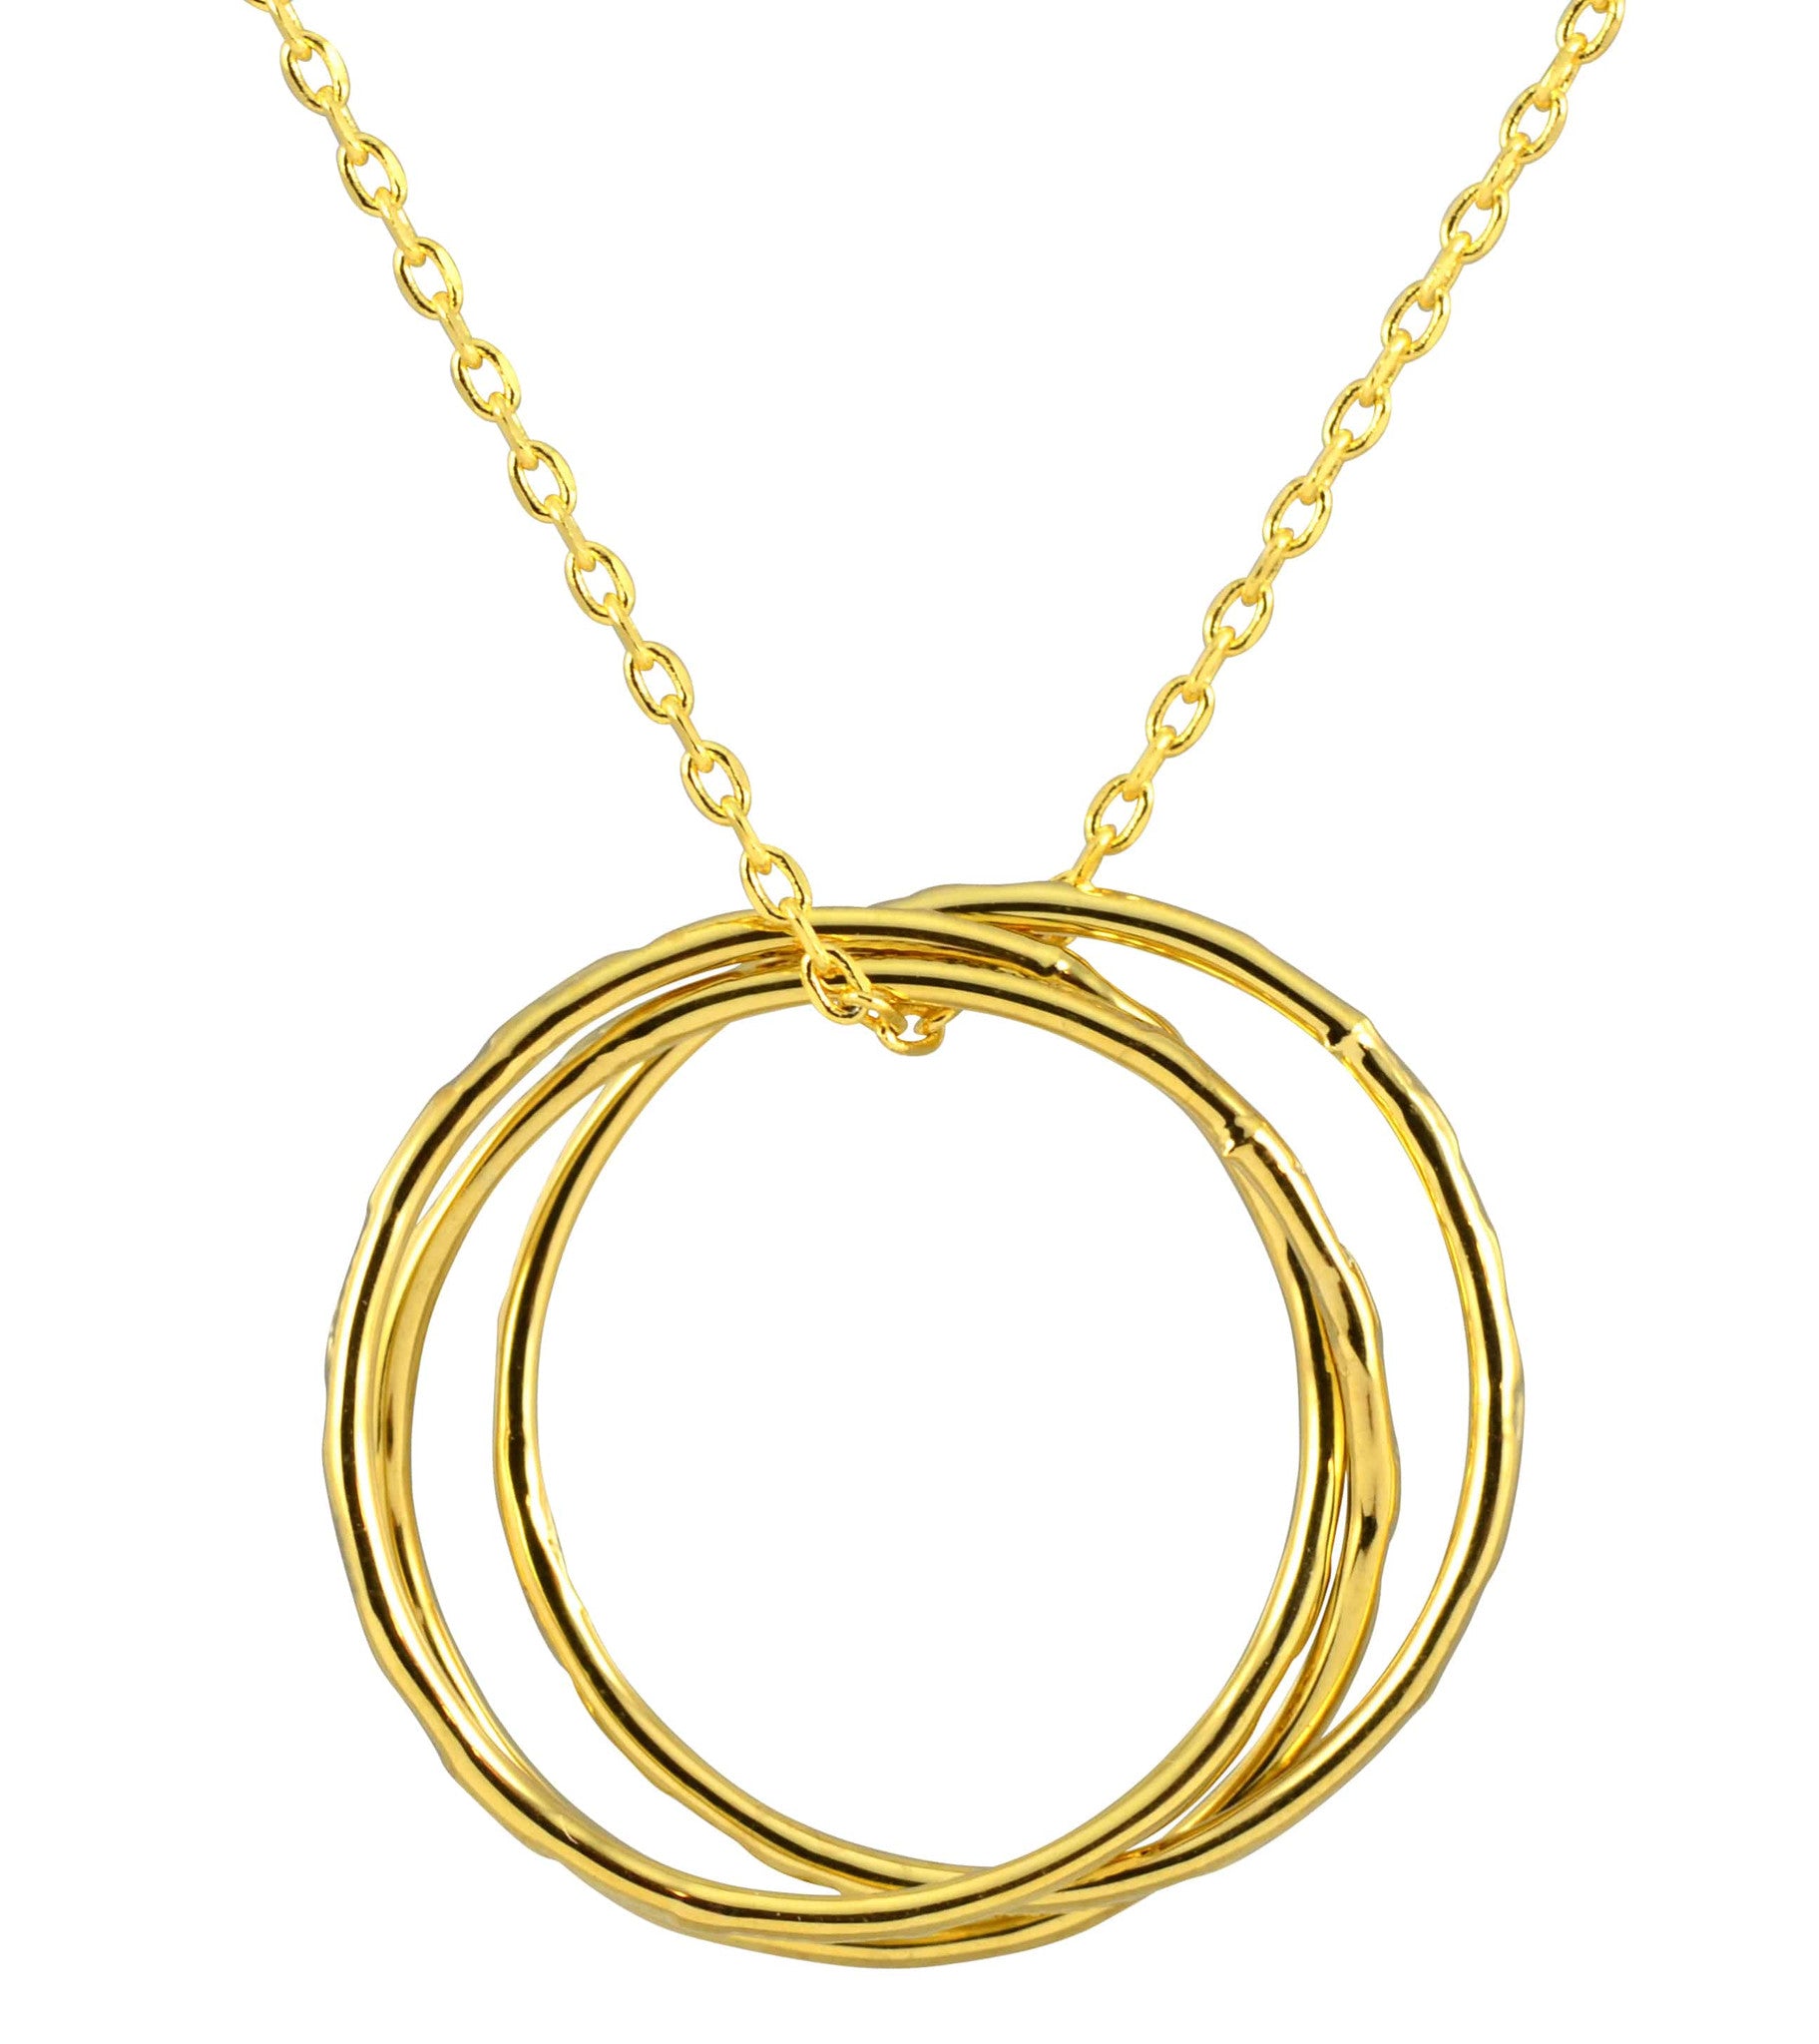 Ring-pendant necklace - Gold-coloured 